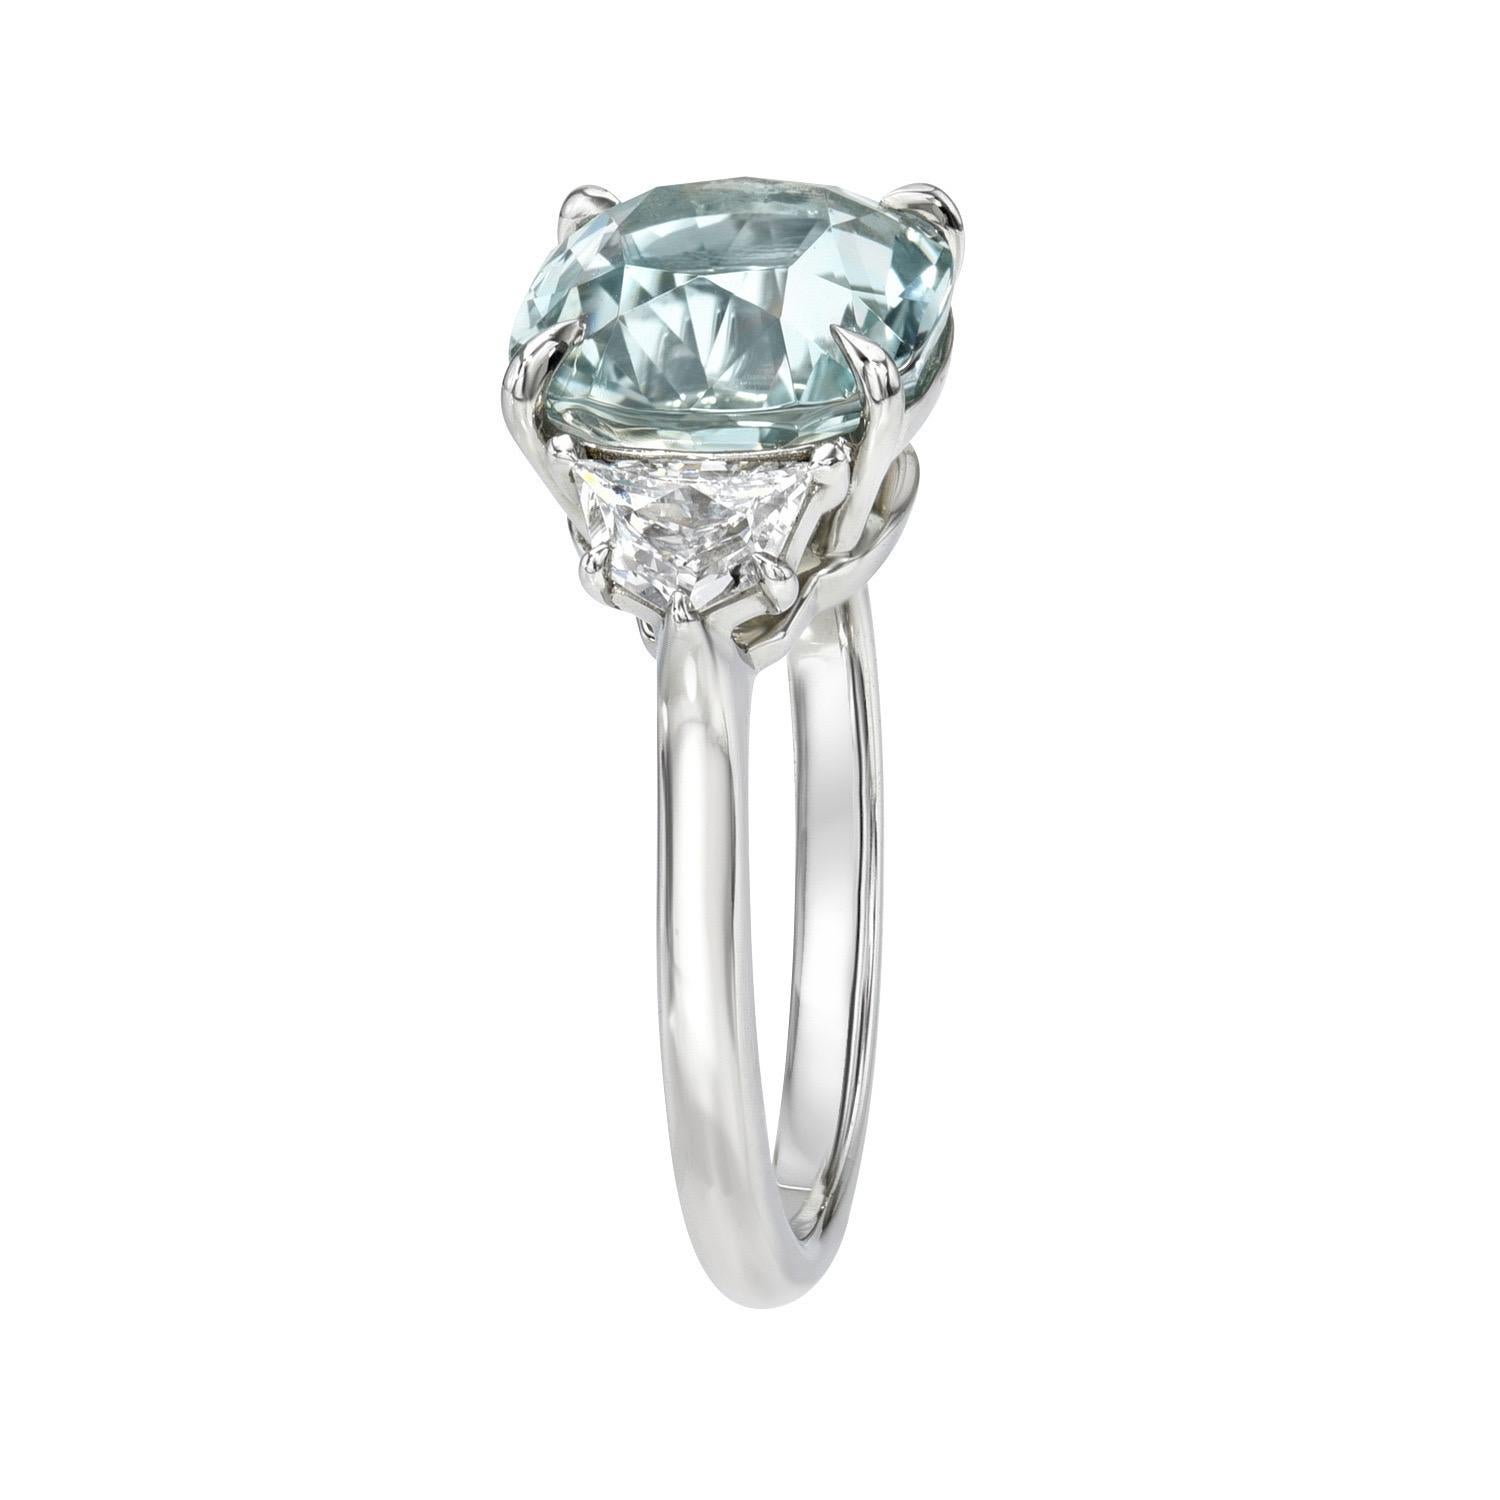 Sea-foam 3.91 carat Green Beryl cushion, three-stone platinum ring, decorated with a pair of 0.50 carats, G color/SI1 clarity, 